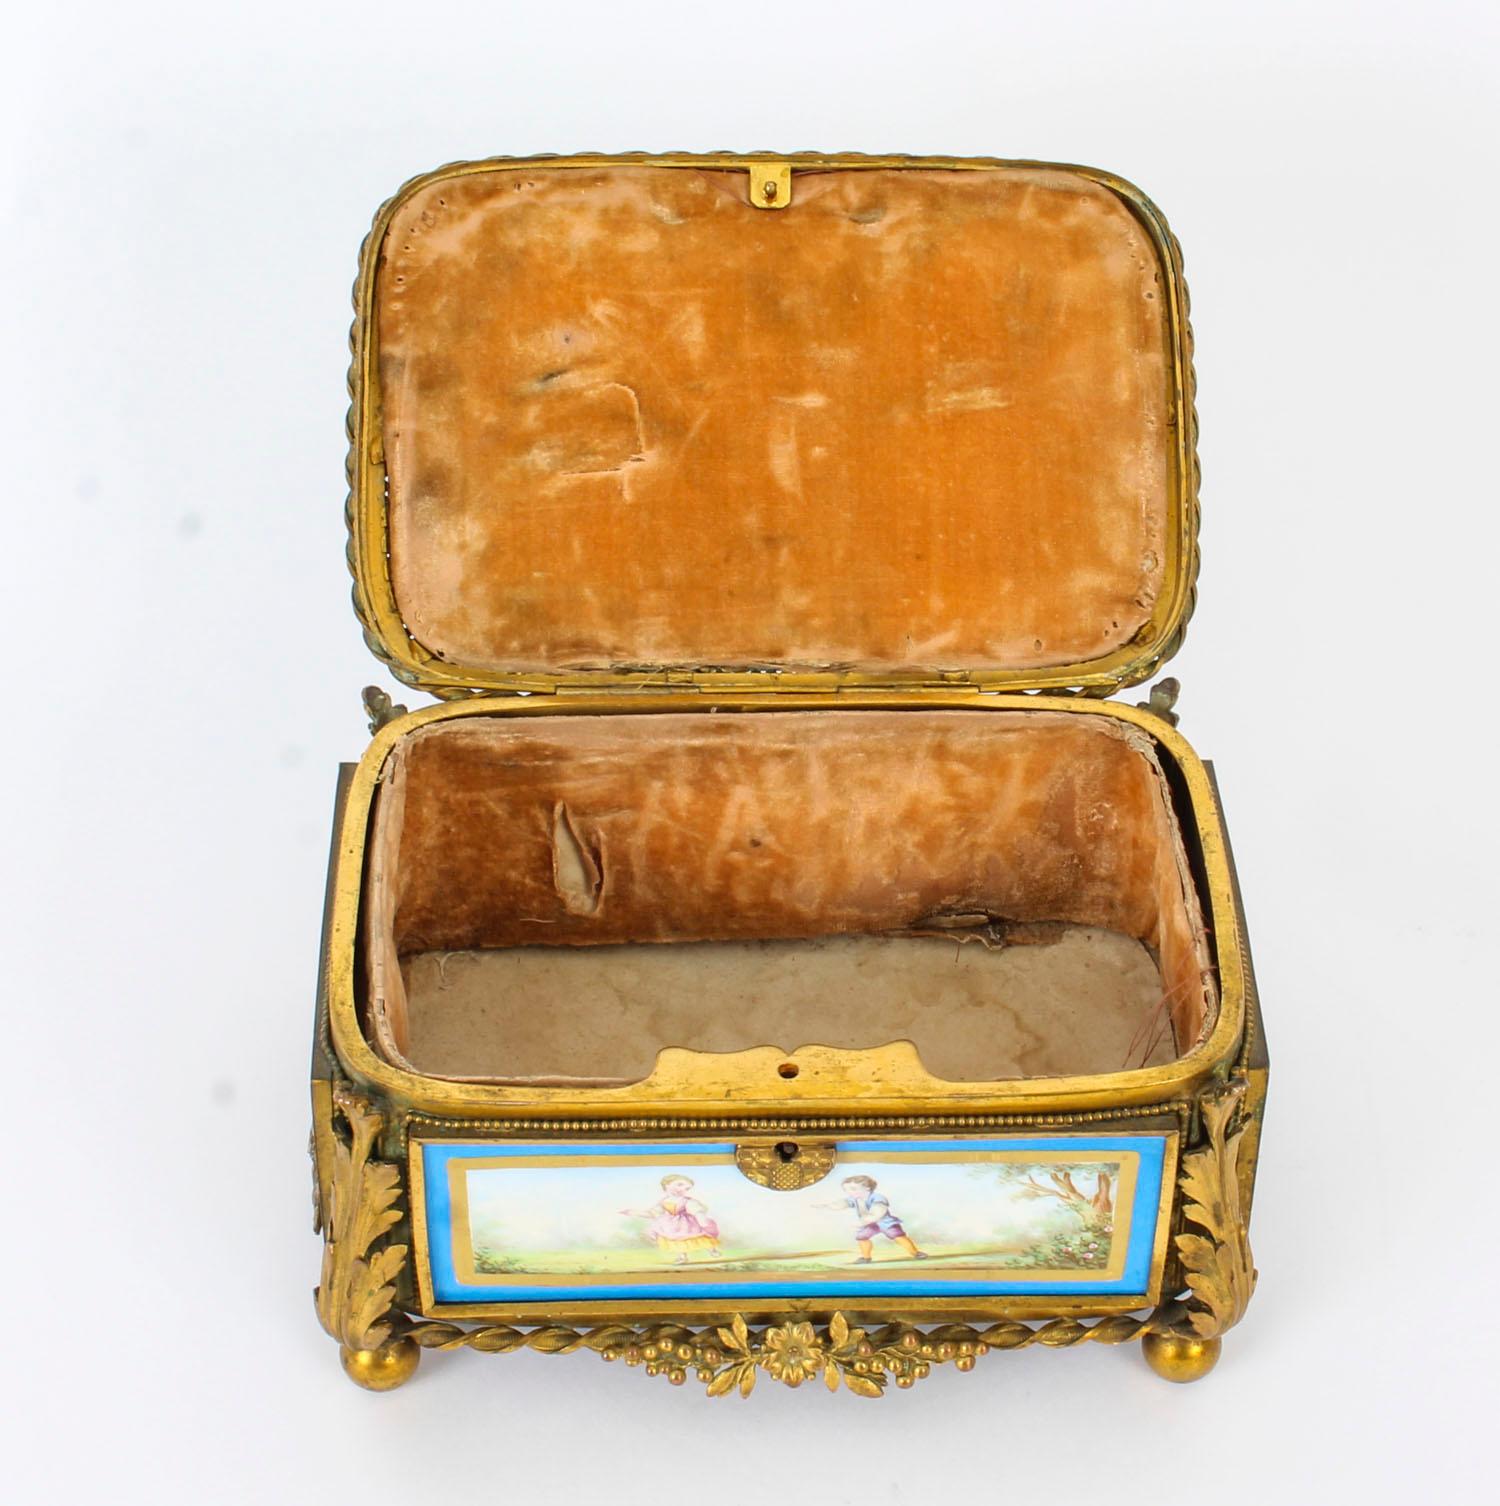 Antique French Sevres Porcelain and Ormolu Jewellery Casket 19th Century  For Sale 10